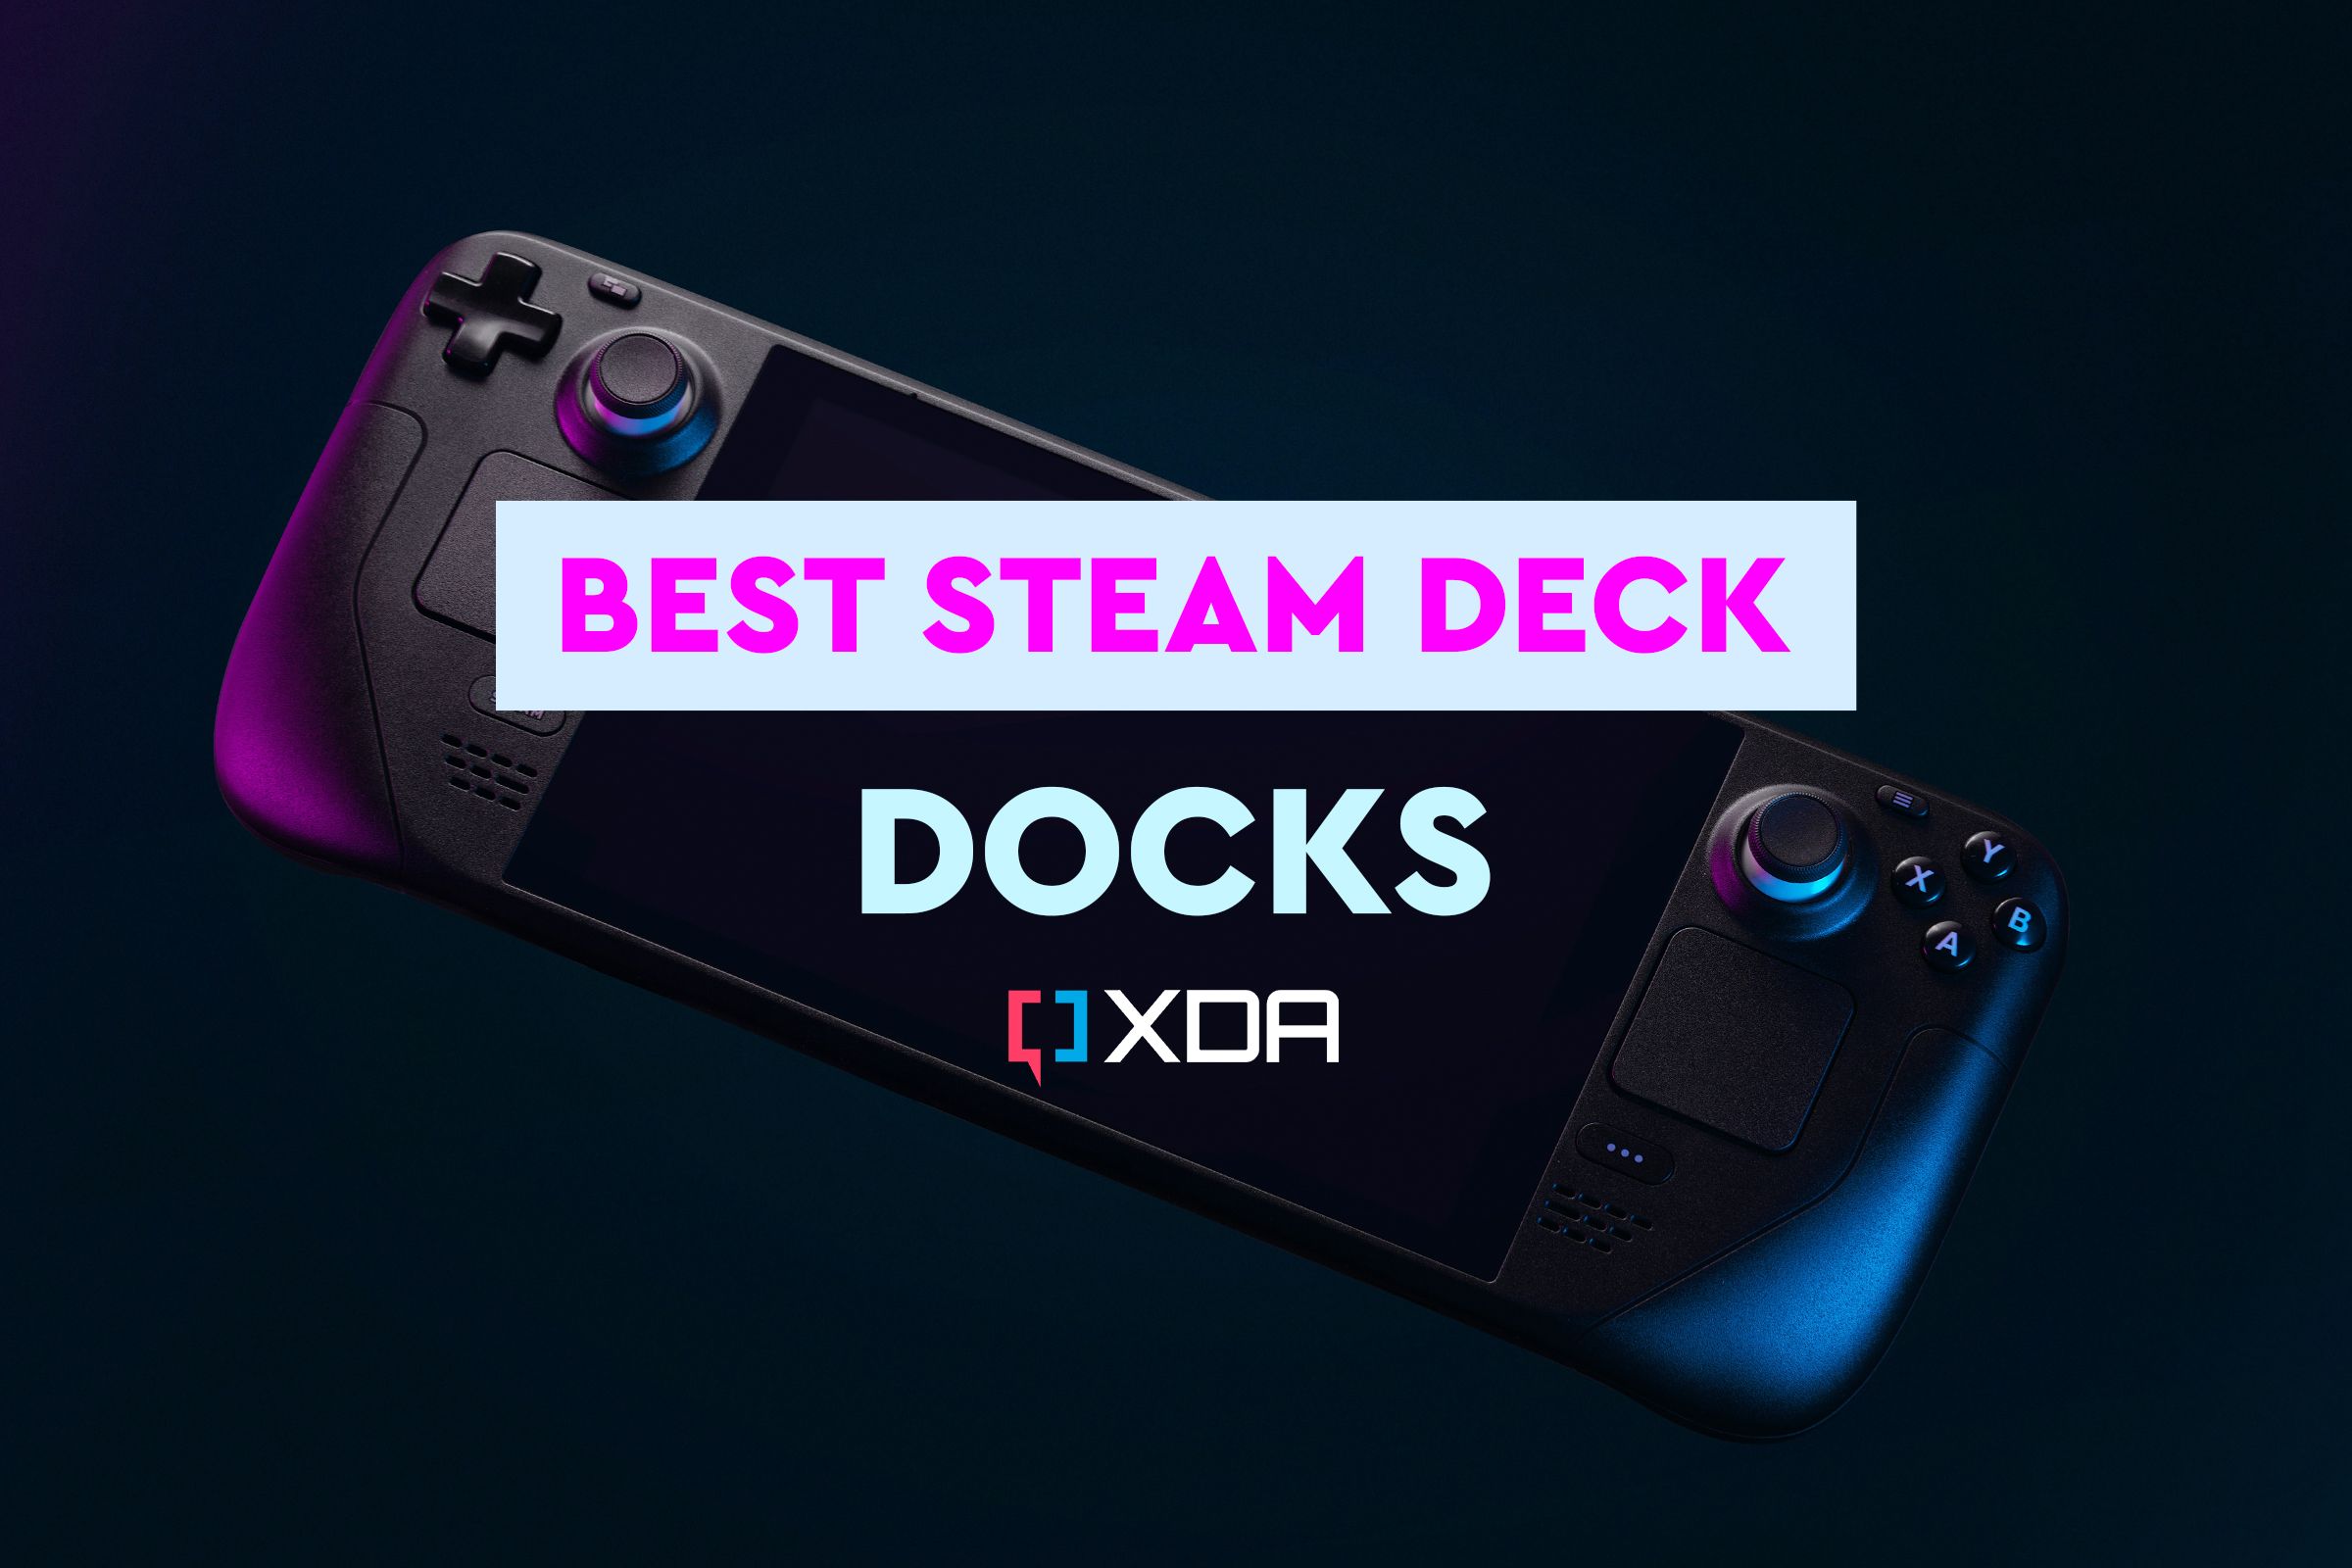 Steam Deck Dock Review - Is it Worth $89?